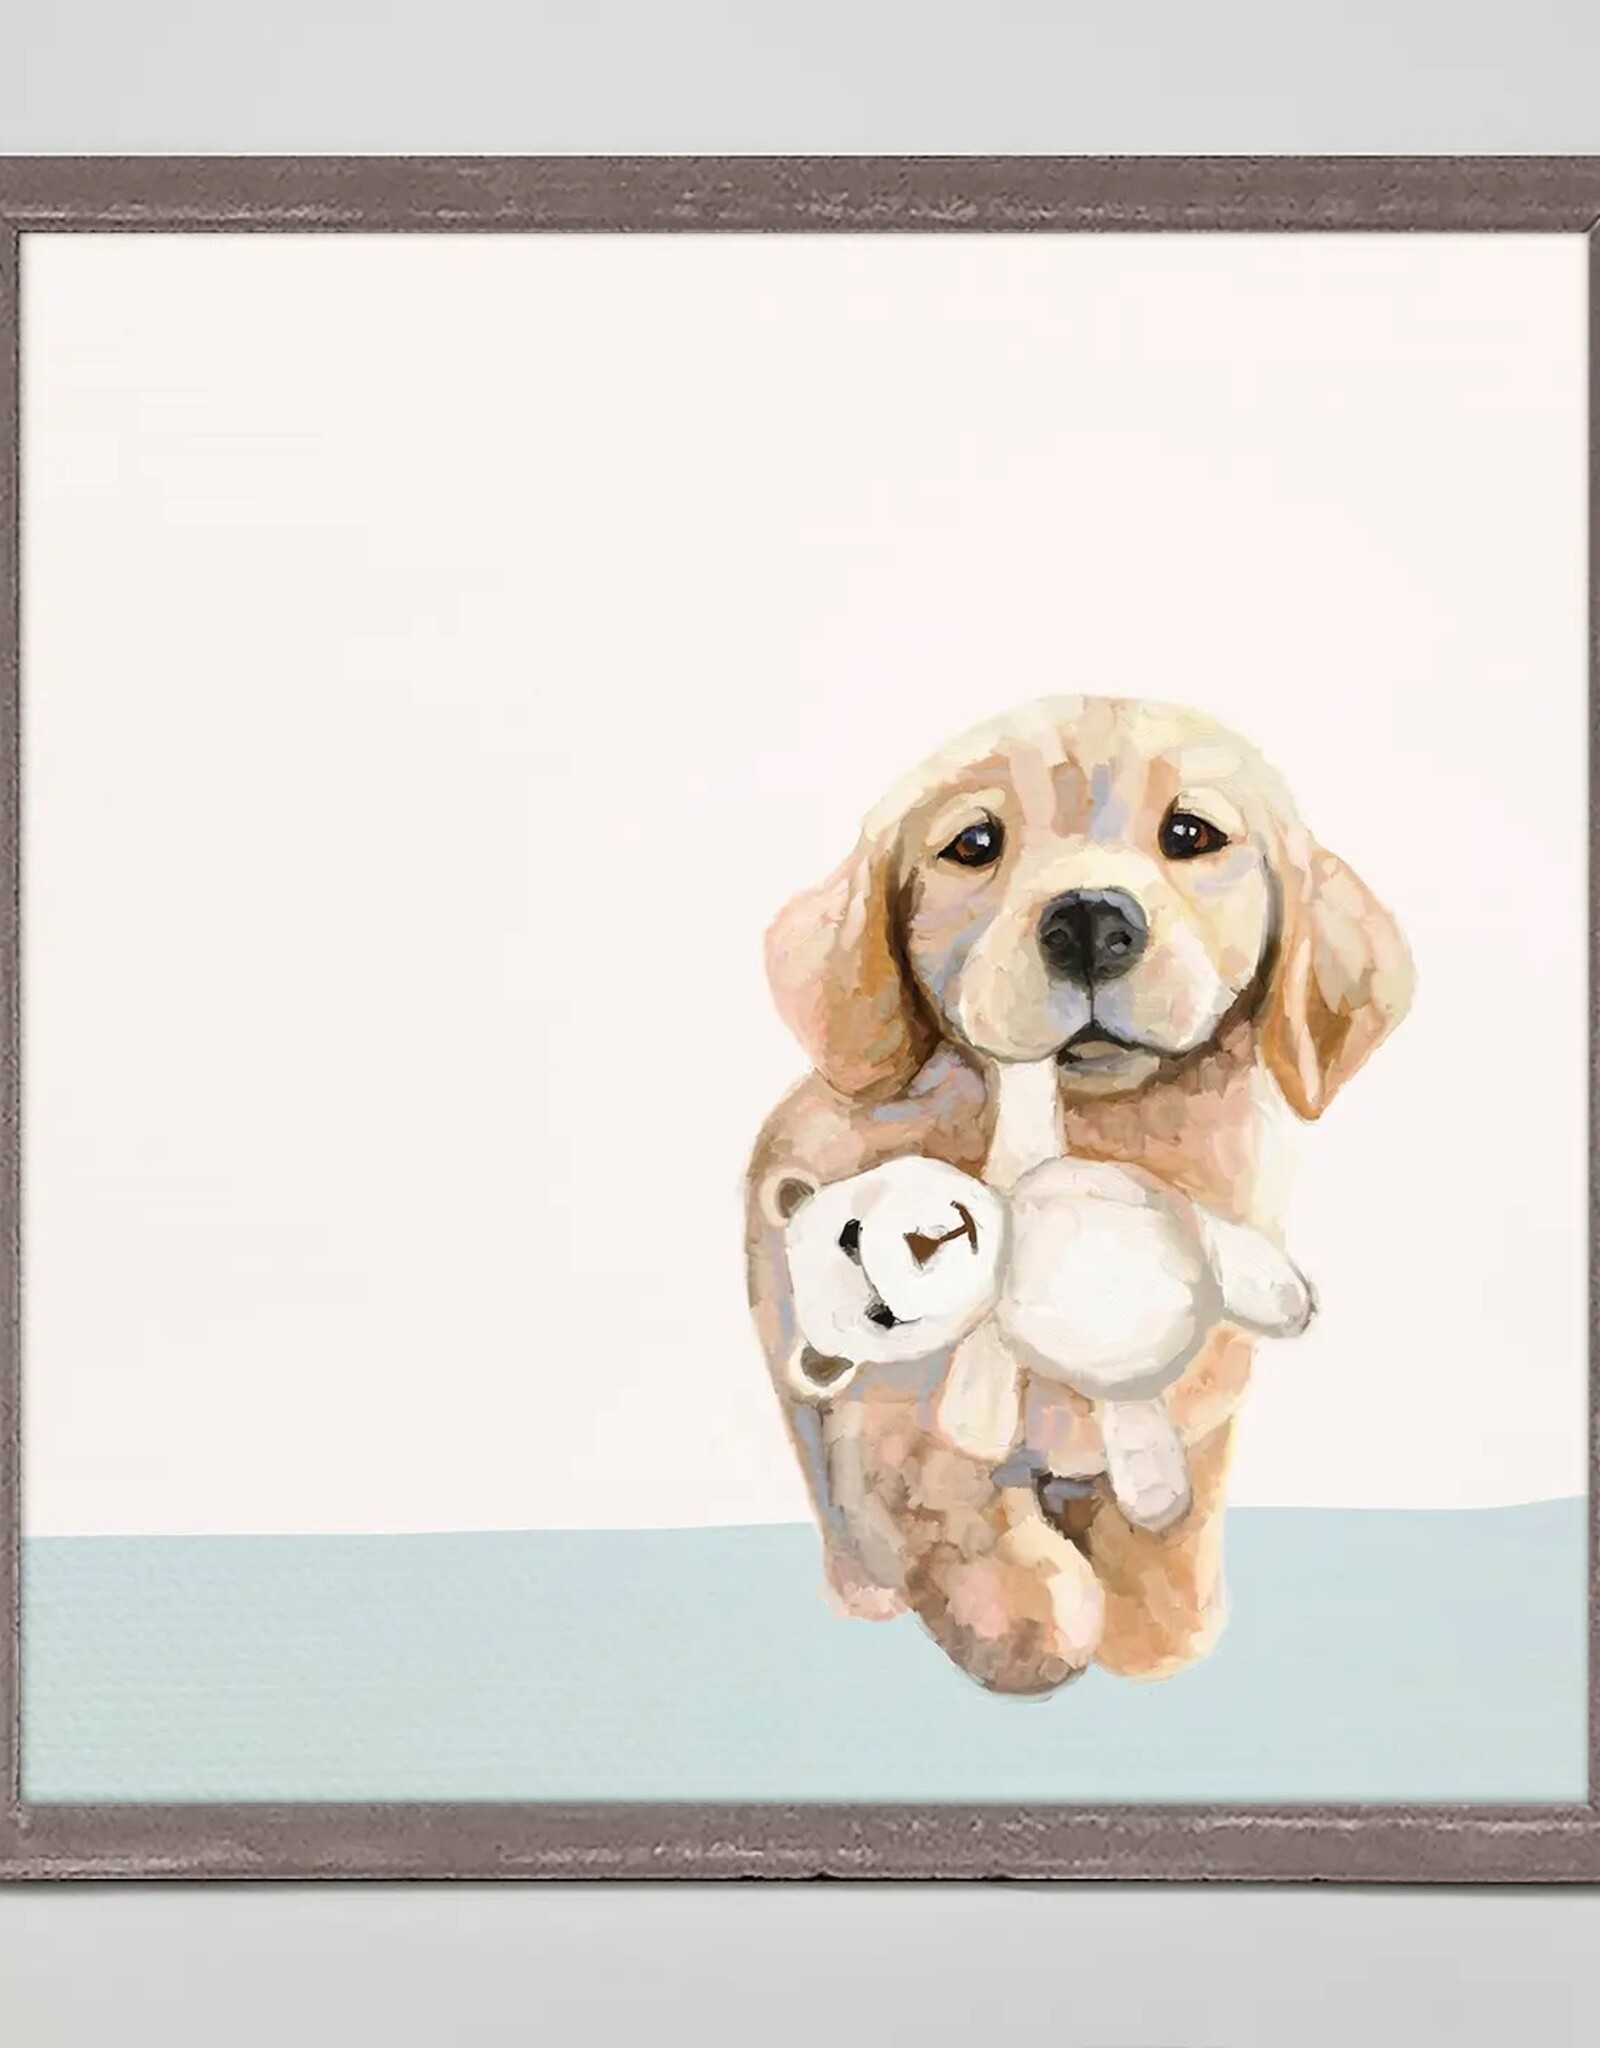 Oopsy Daisy / Green Box PUP WITH TEDDY MINI FRAMED CANVAS - Cathy Walters artwork